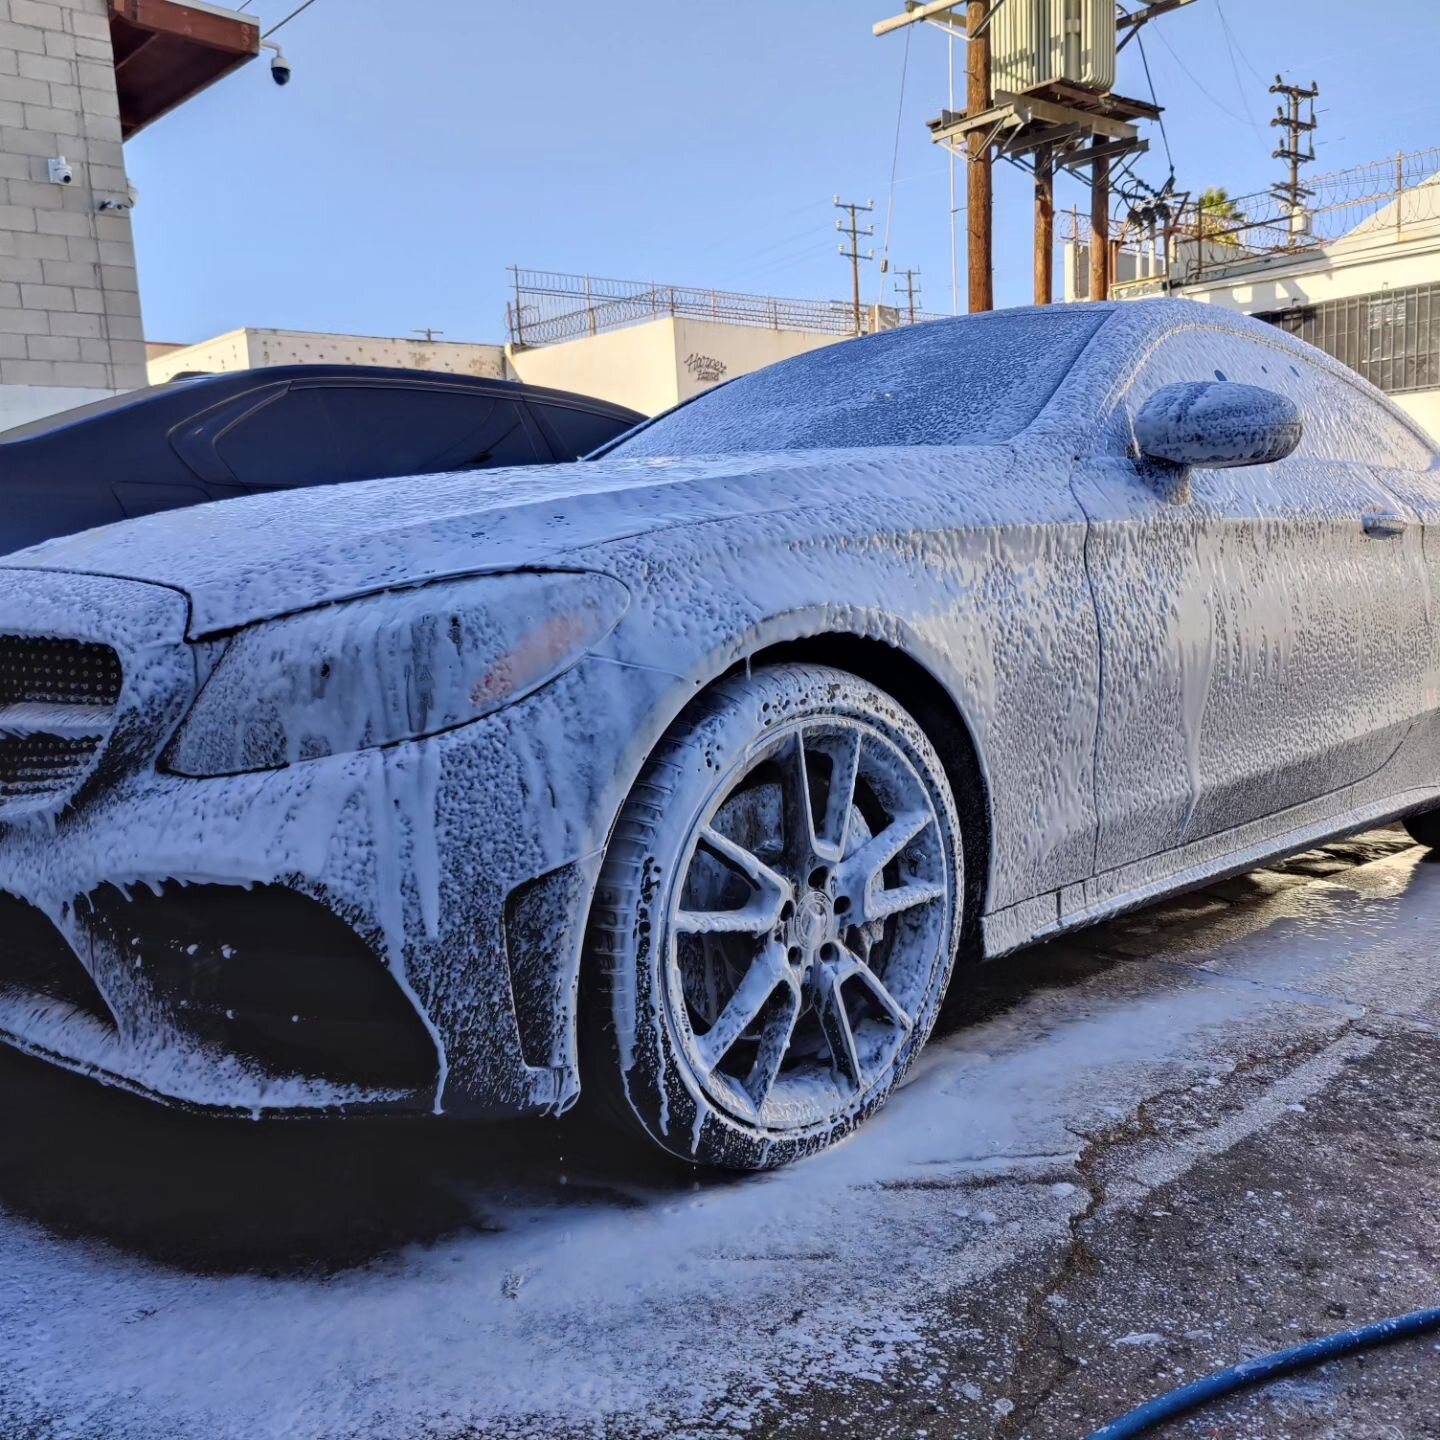 Basic Wash Package + Clay decontamination &amp; Wax on this Beautiful AMG Mercedes. Make sure to Book with Geo's Mobile Auto Detailing to give your car the beautiful shine it once had! 
.
.
.
.
.
.
.
.
.
.
#detailing #carwash #claydecontamination #wa